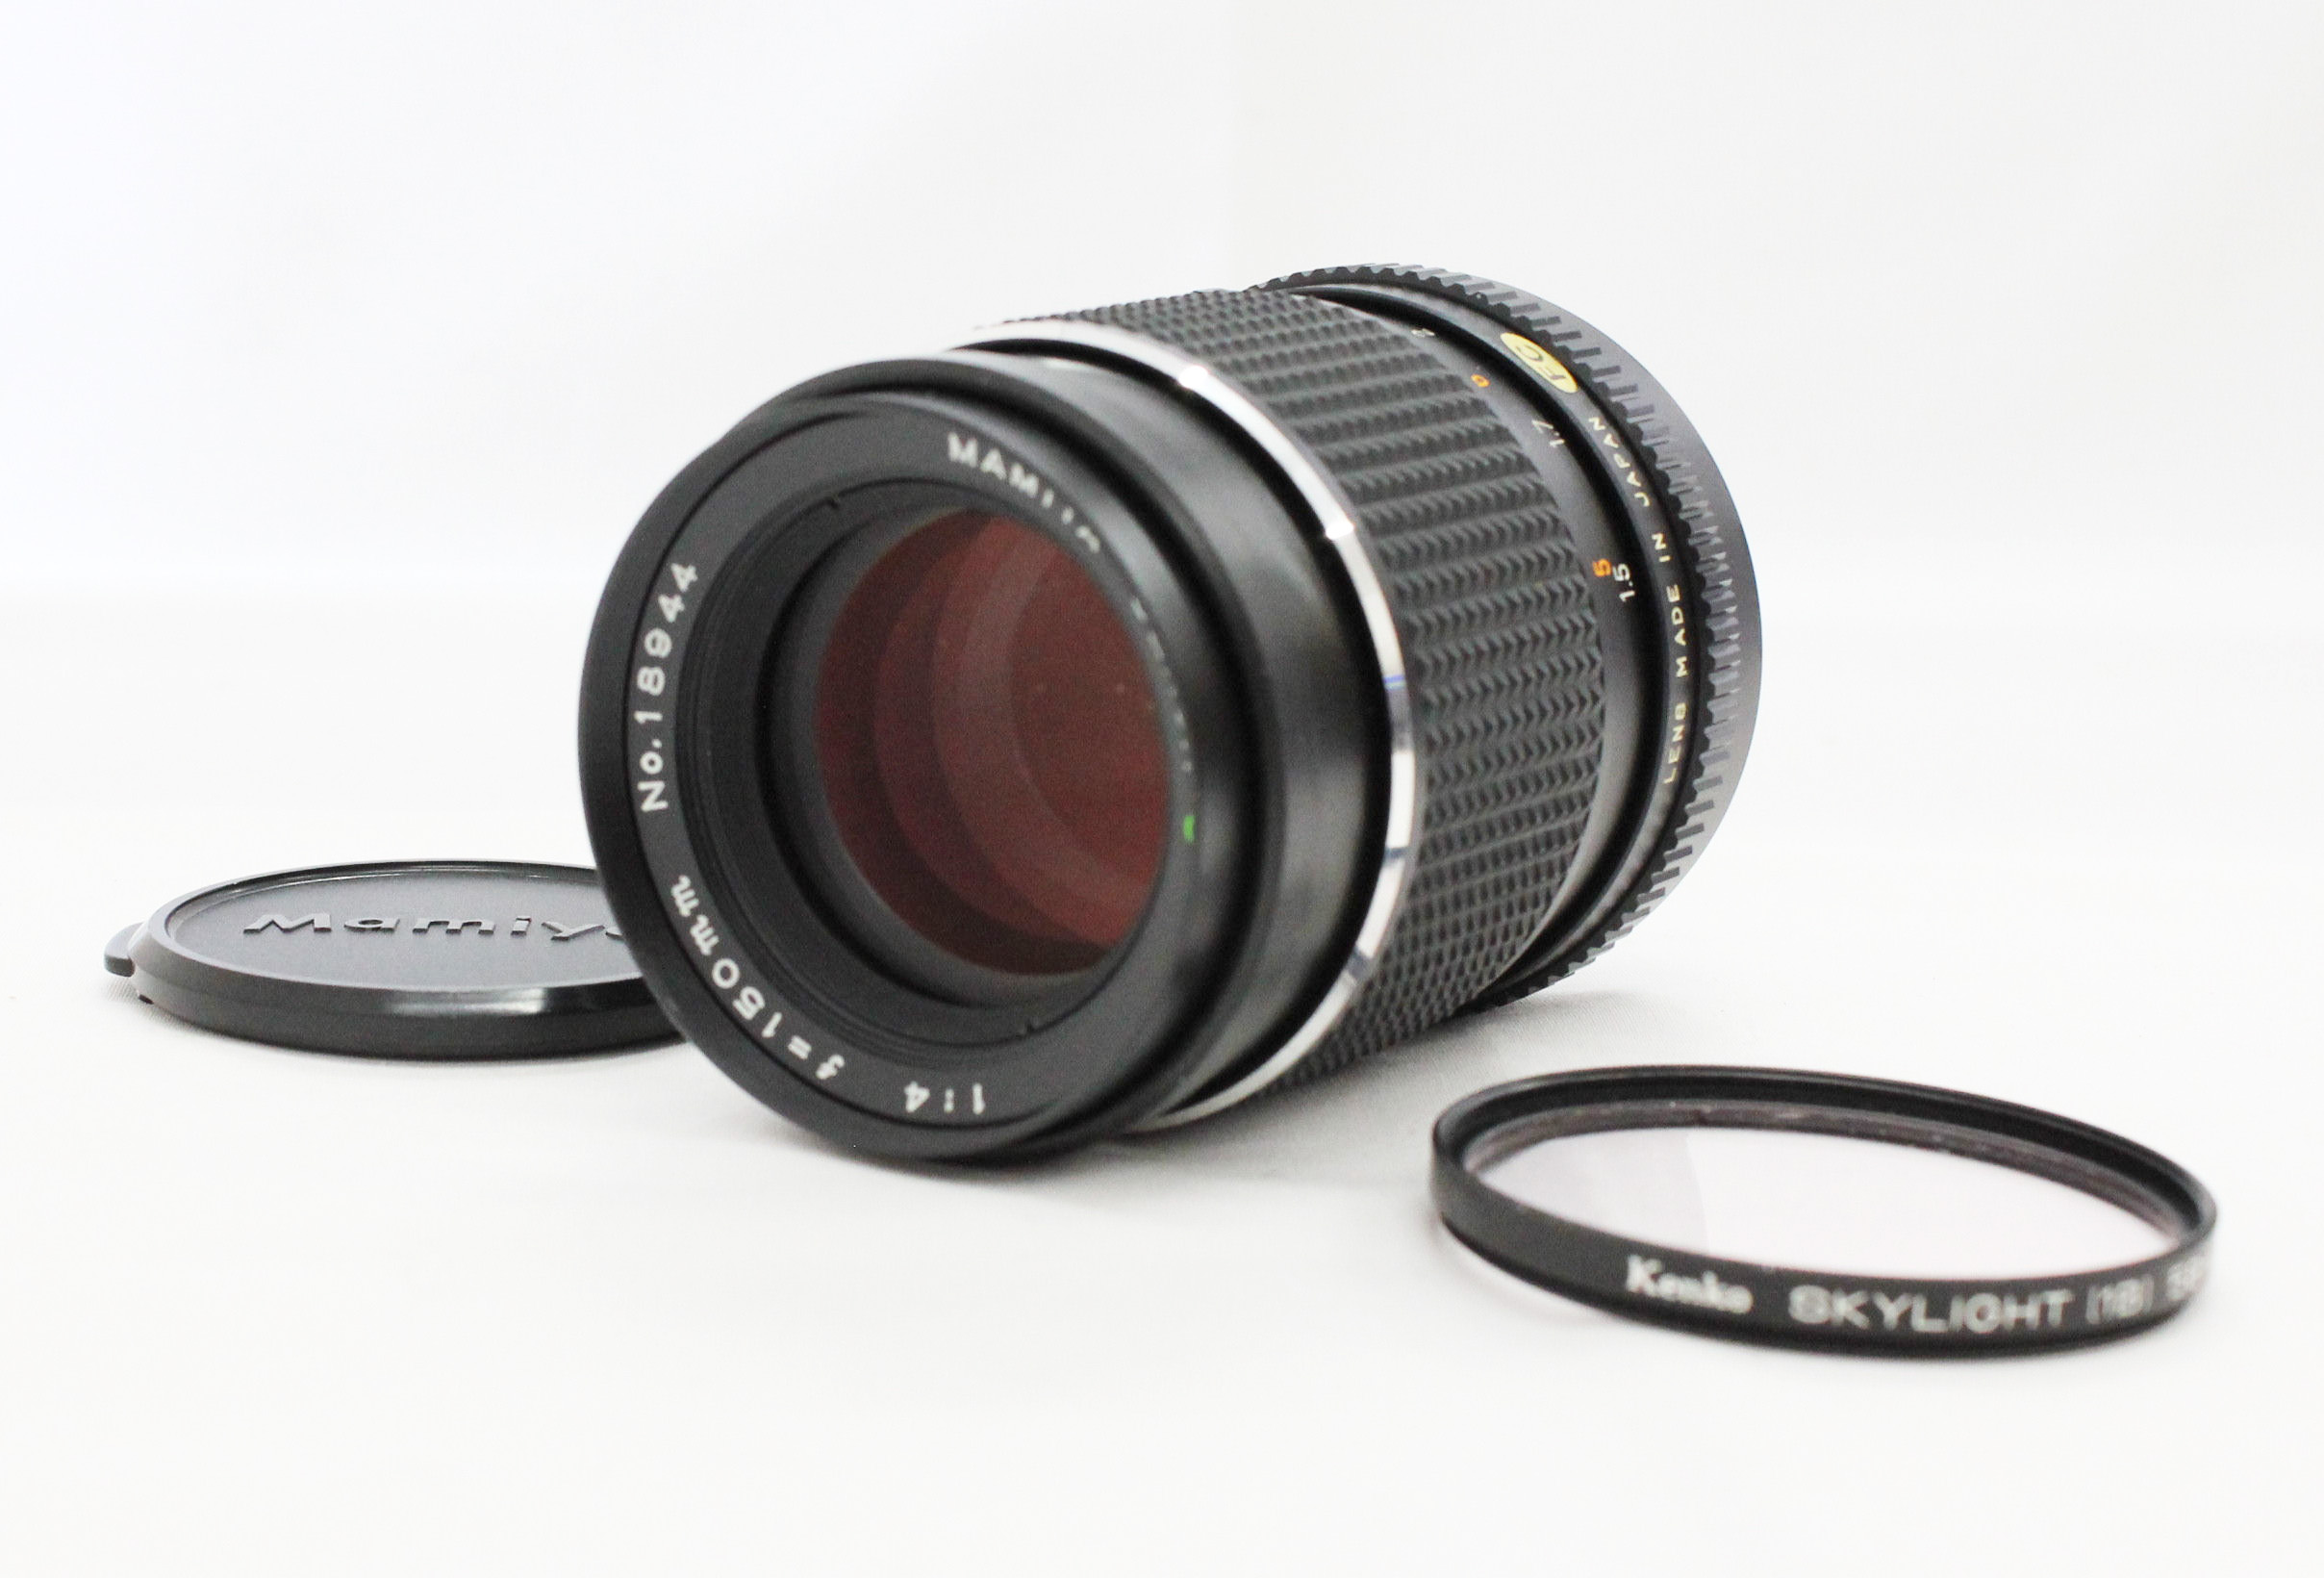 Japan Used Camera Shop | [Mint] Mamiya-Sekor C 150mm F/4 Lens for M645/Pro/TL/1000s from Japan